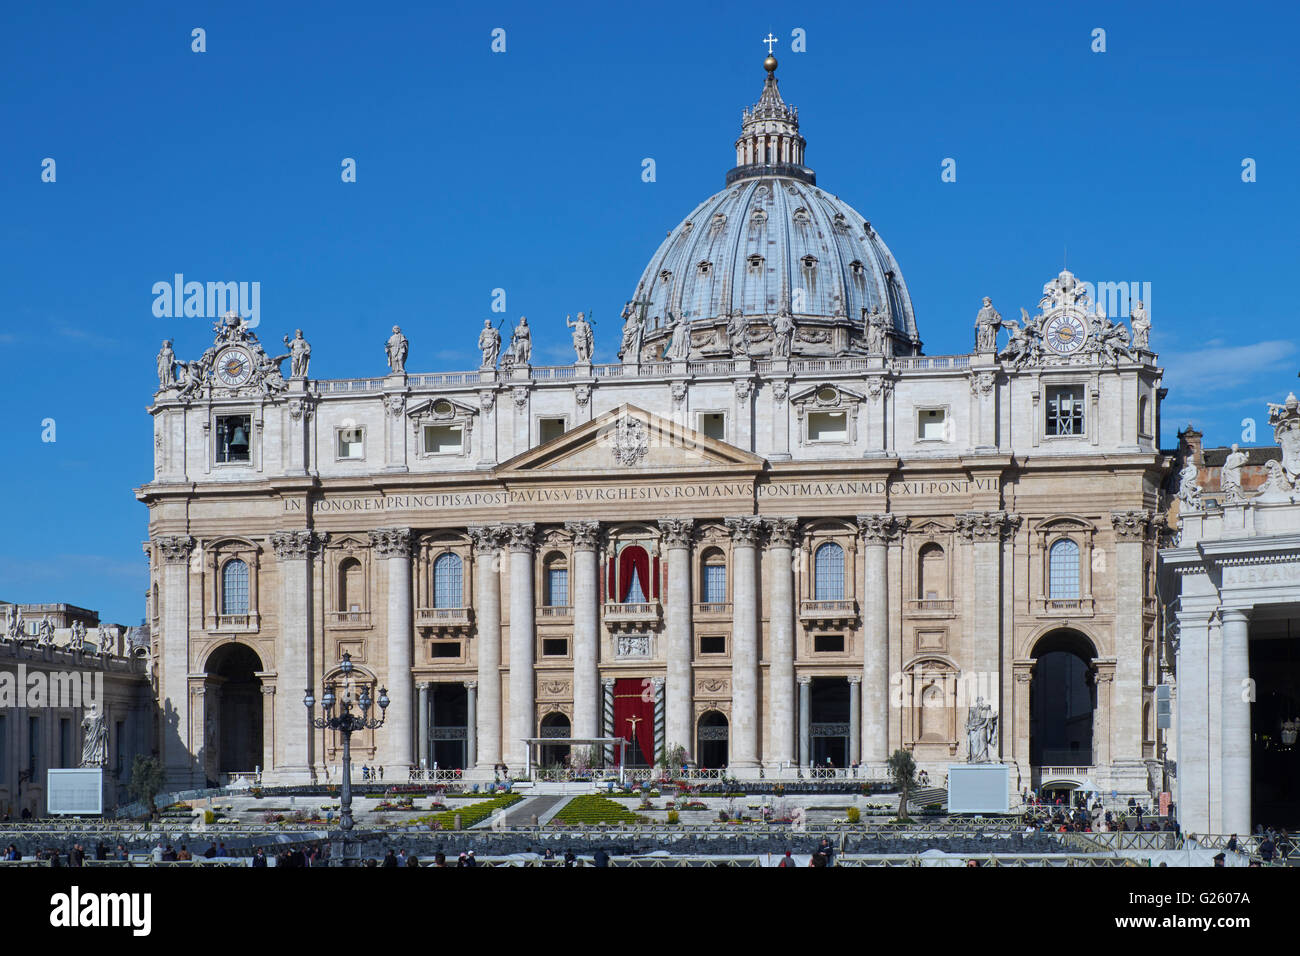 St Peter's Rome (Basilica of San Pietro) east end. Stock Photo